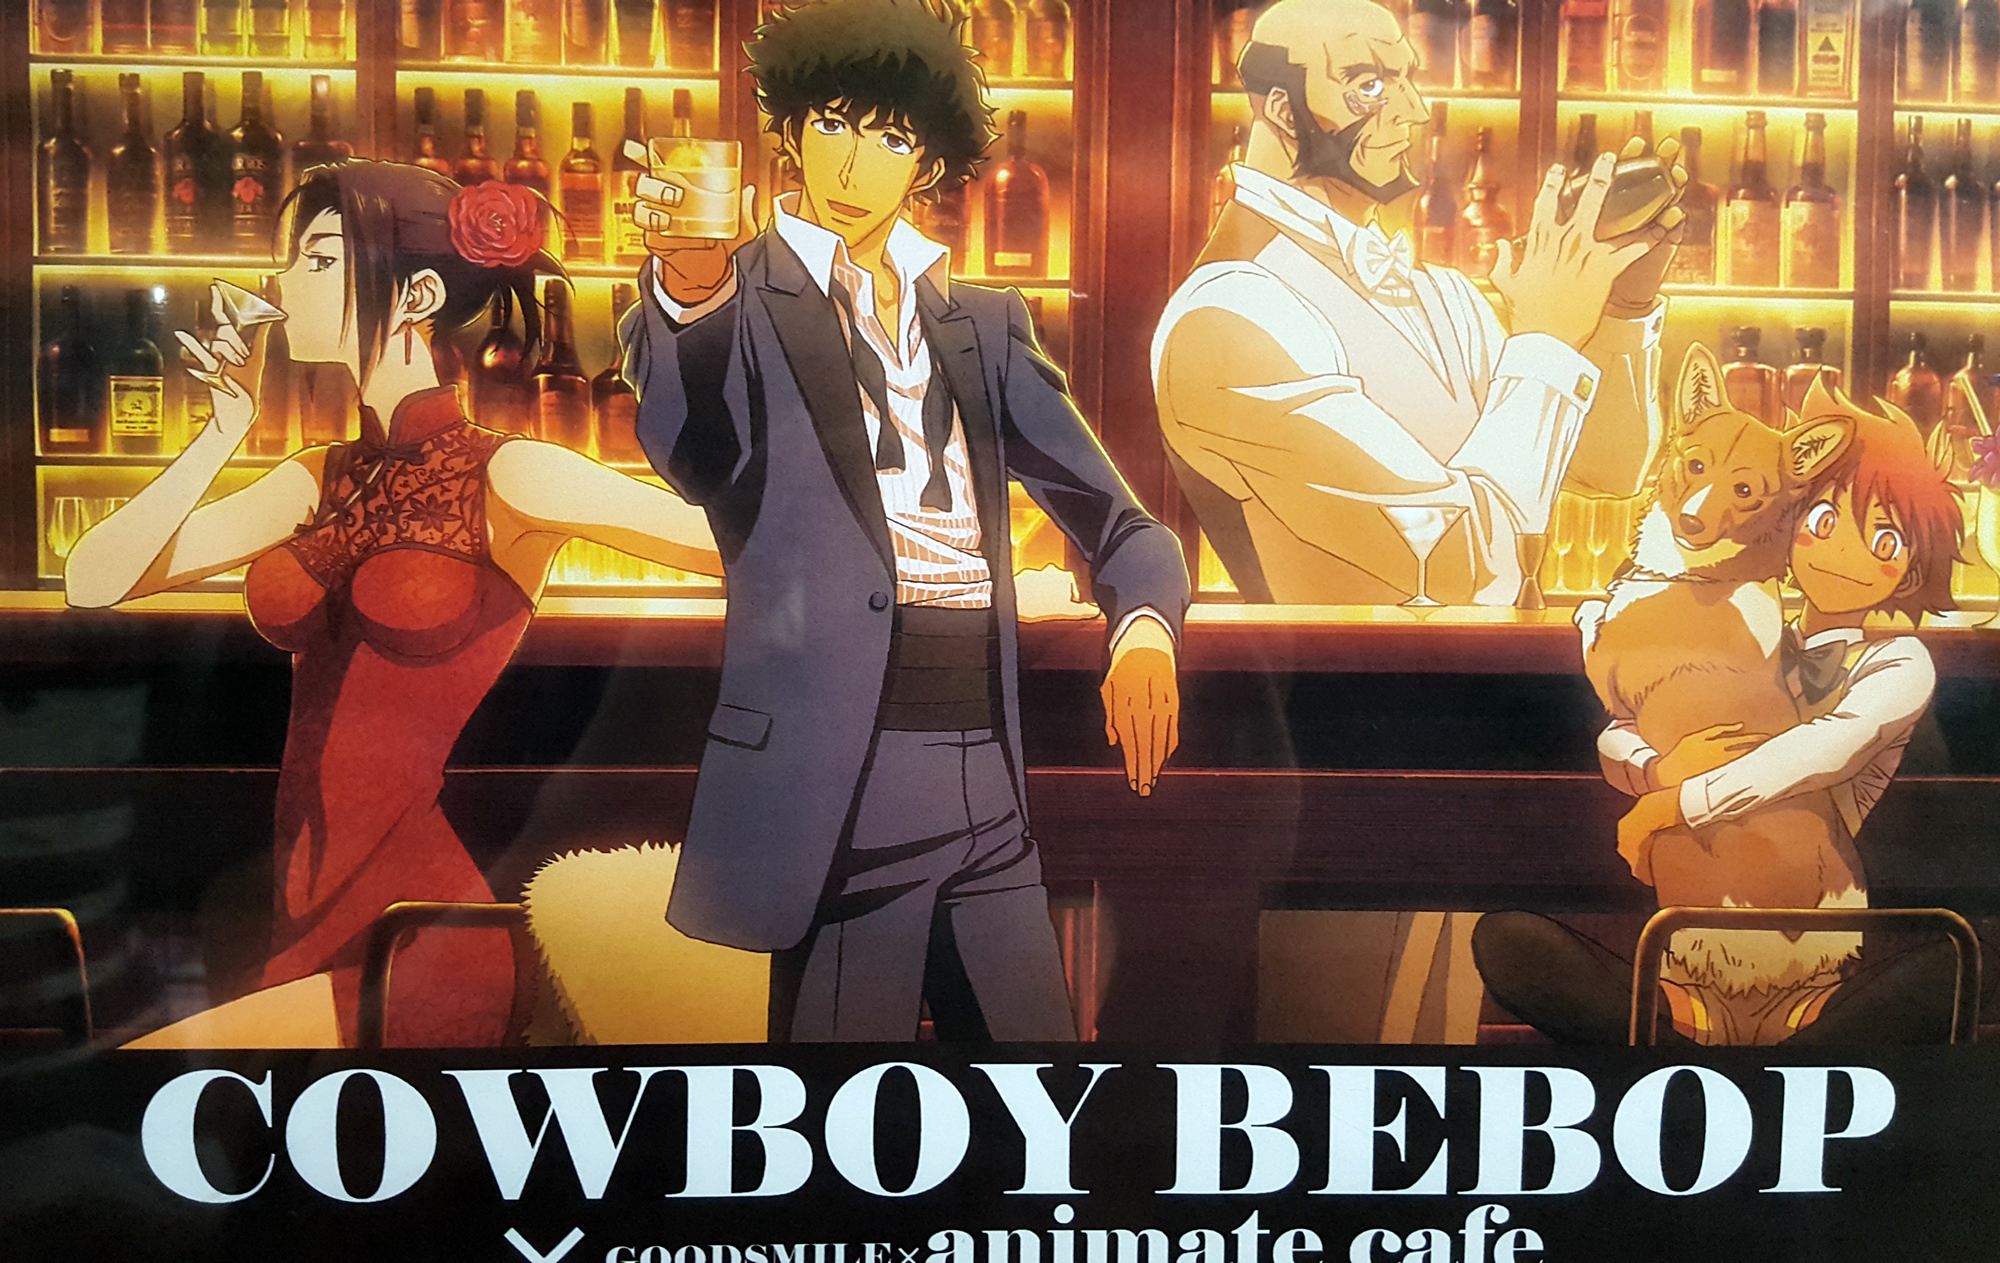 A Trip To The Cowboy Bebop th Anniversary Cafe Hobbylink Tv